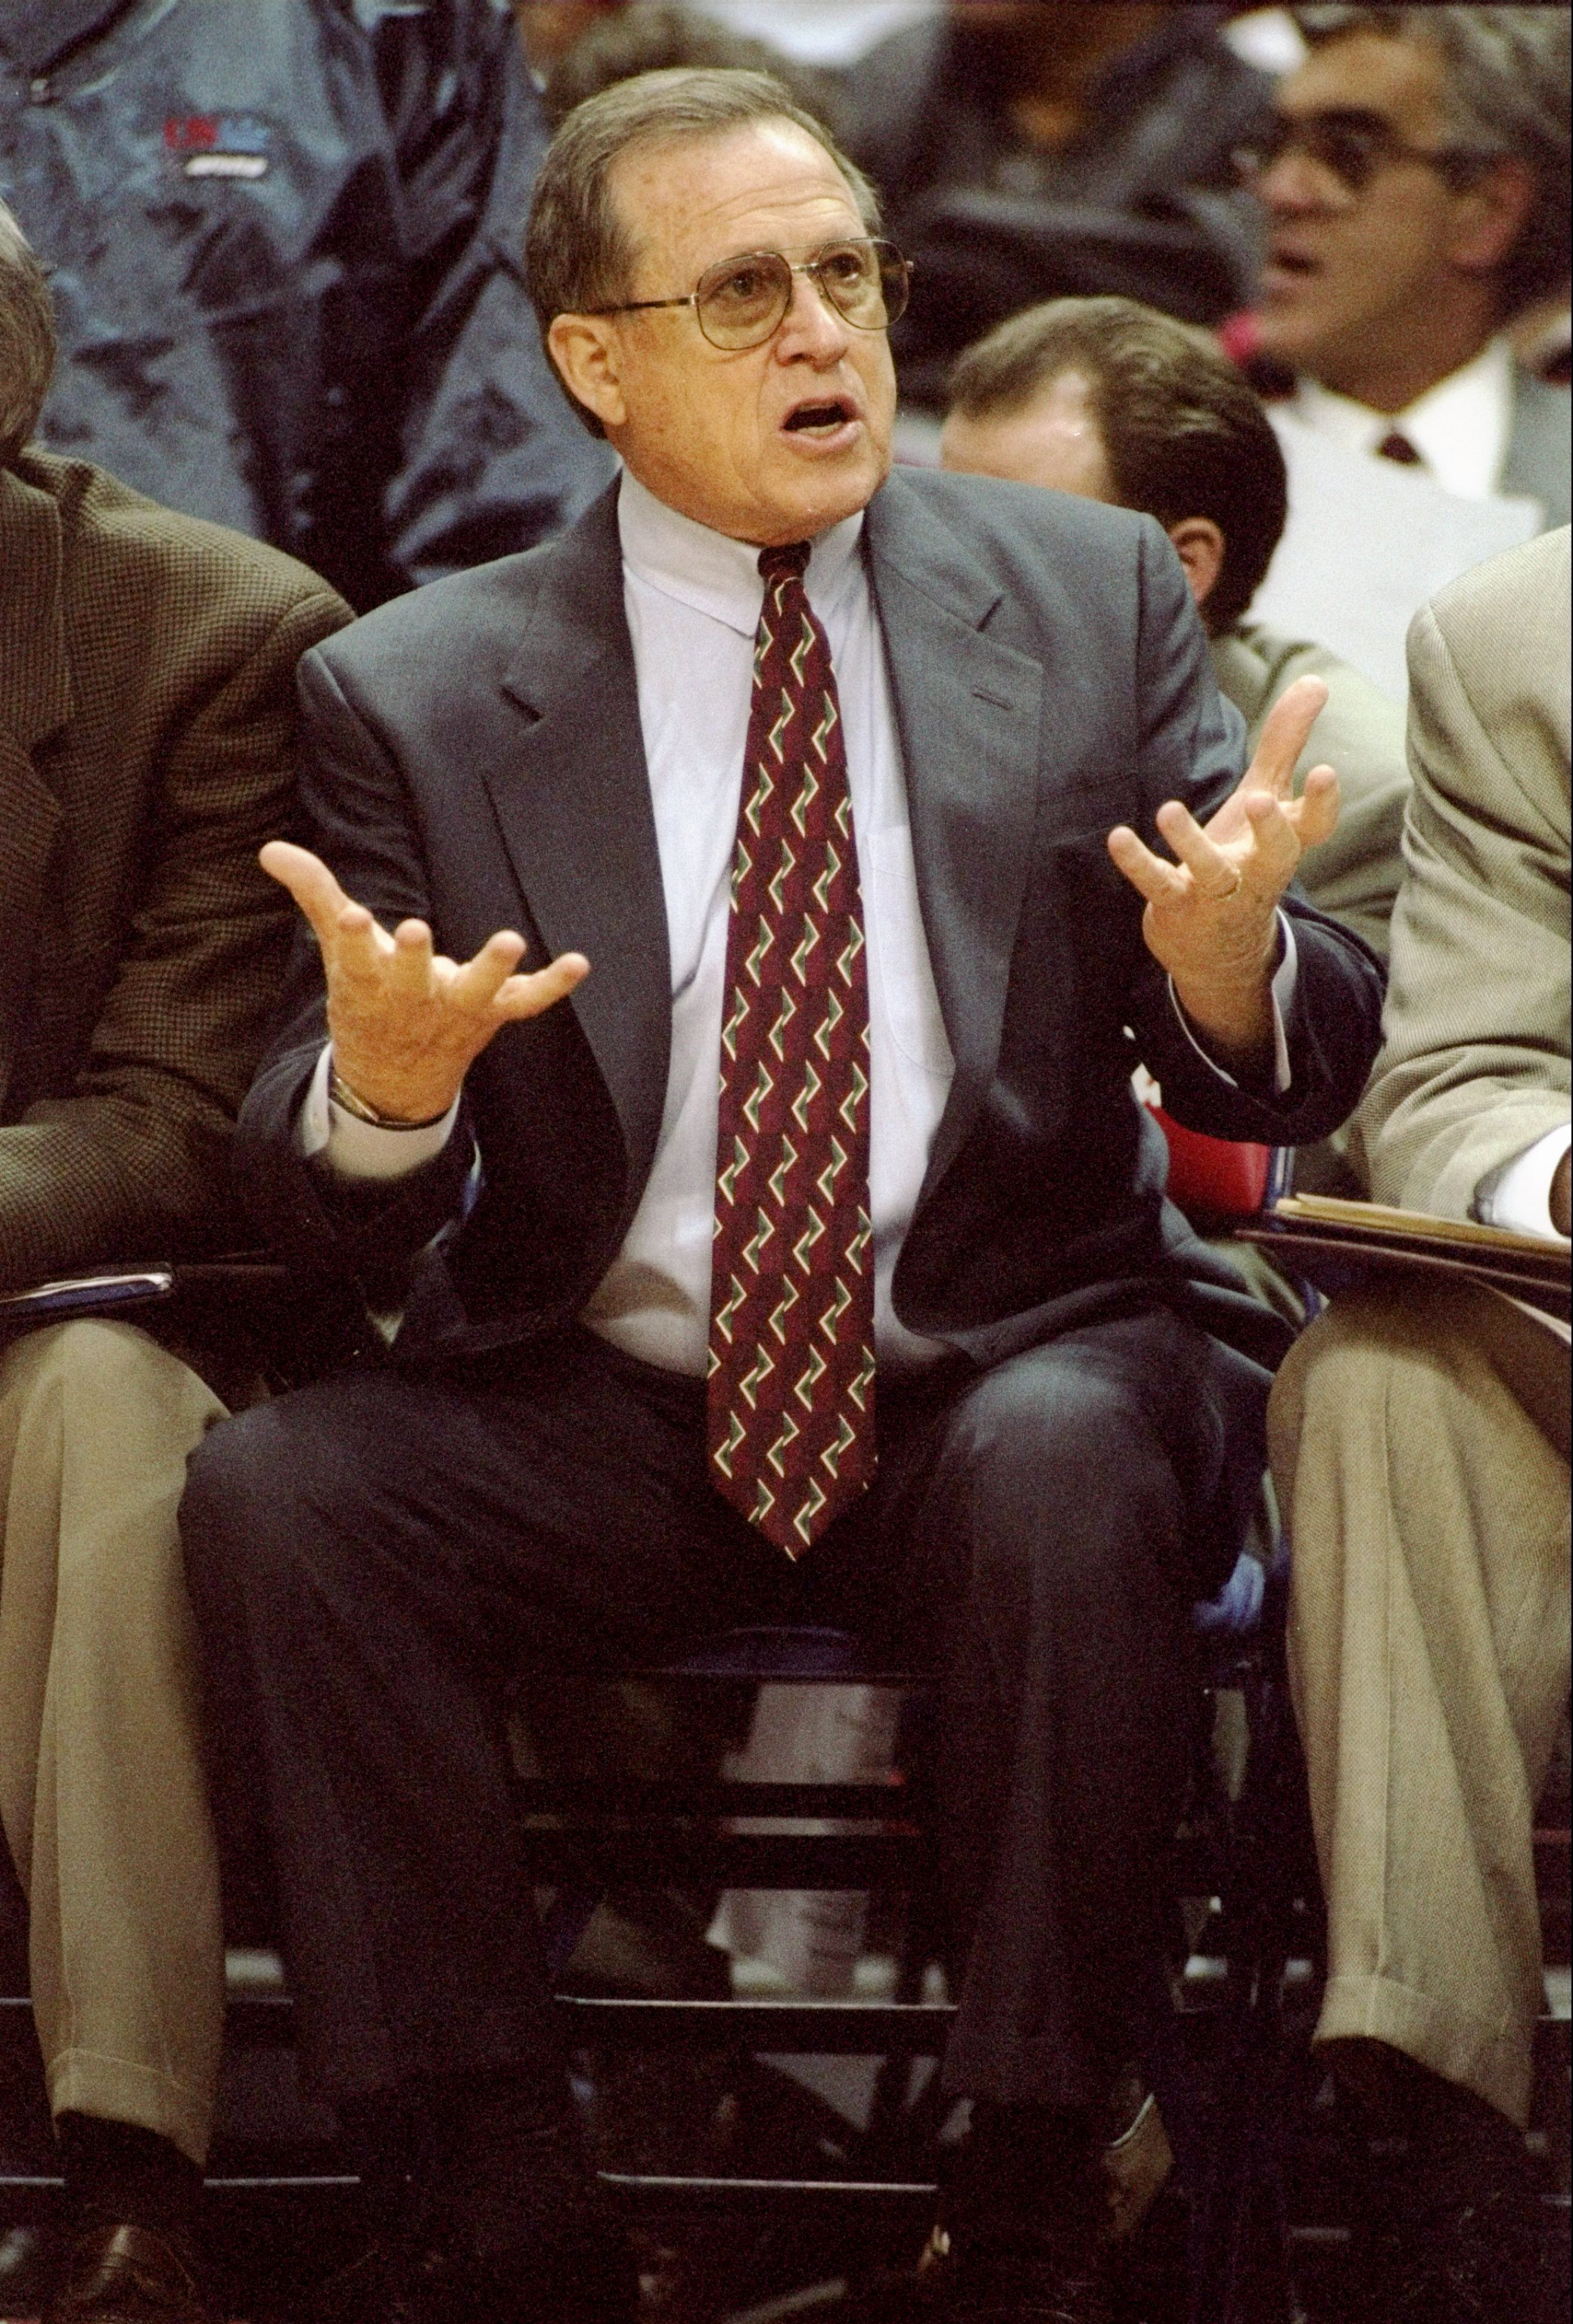 Hall of fame coach dick